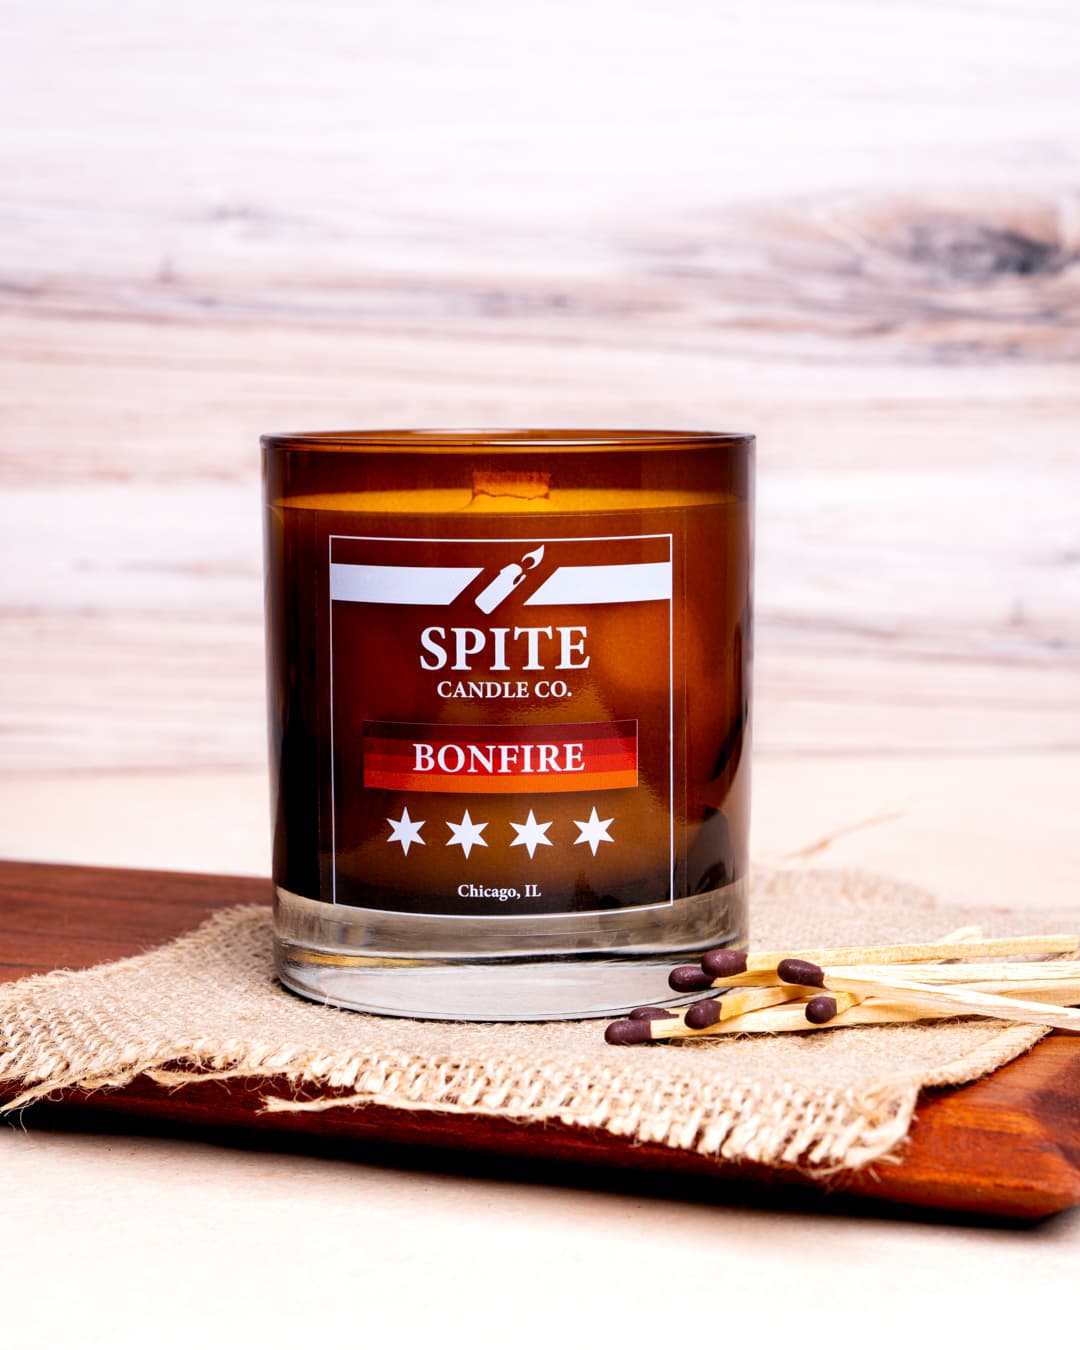 High Quality Spite Candle Company Bonfire Candle with Matches Blank Meme Template